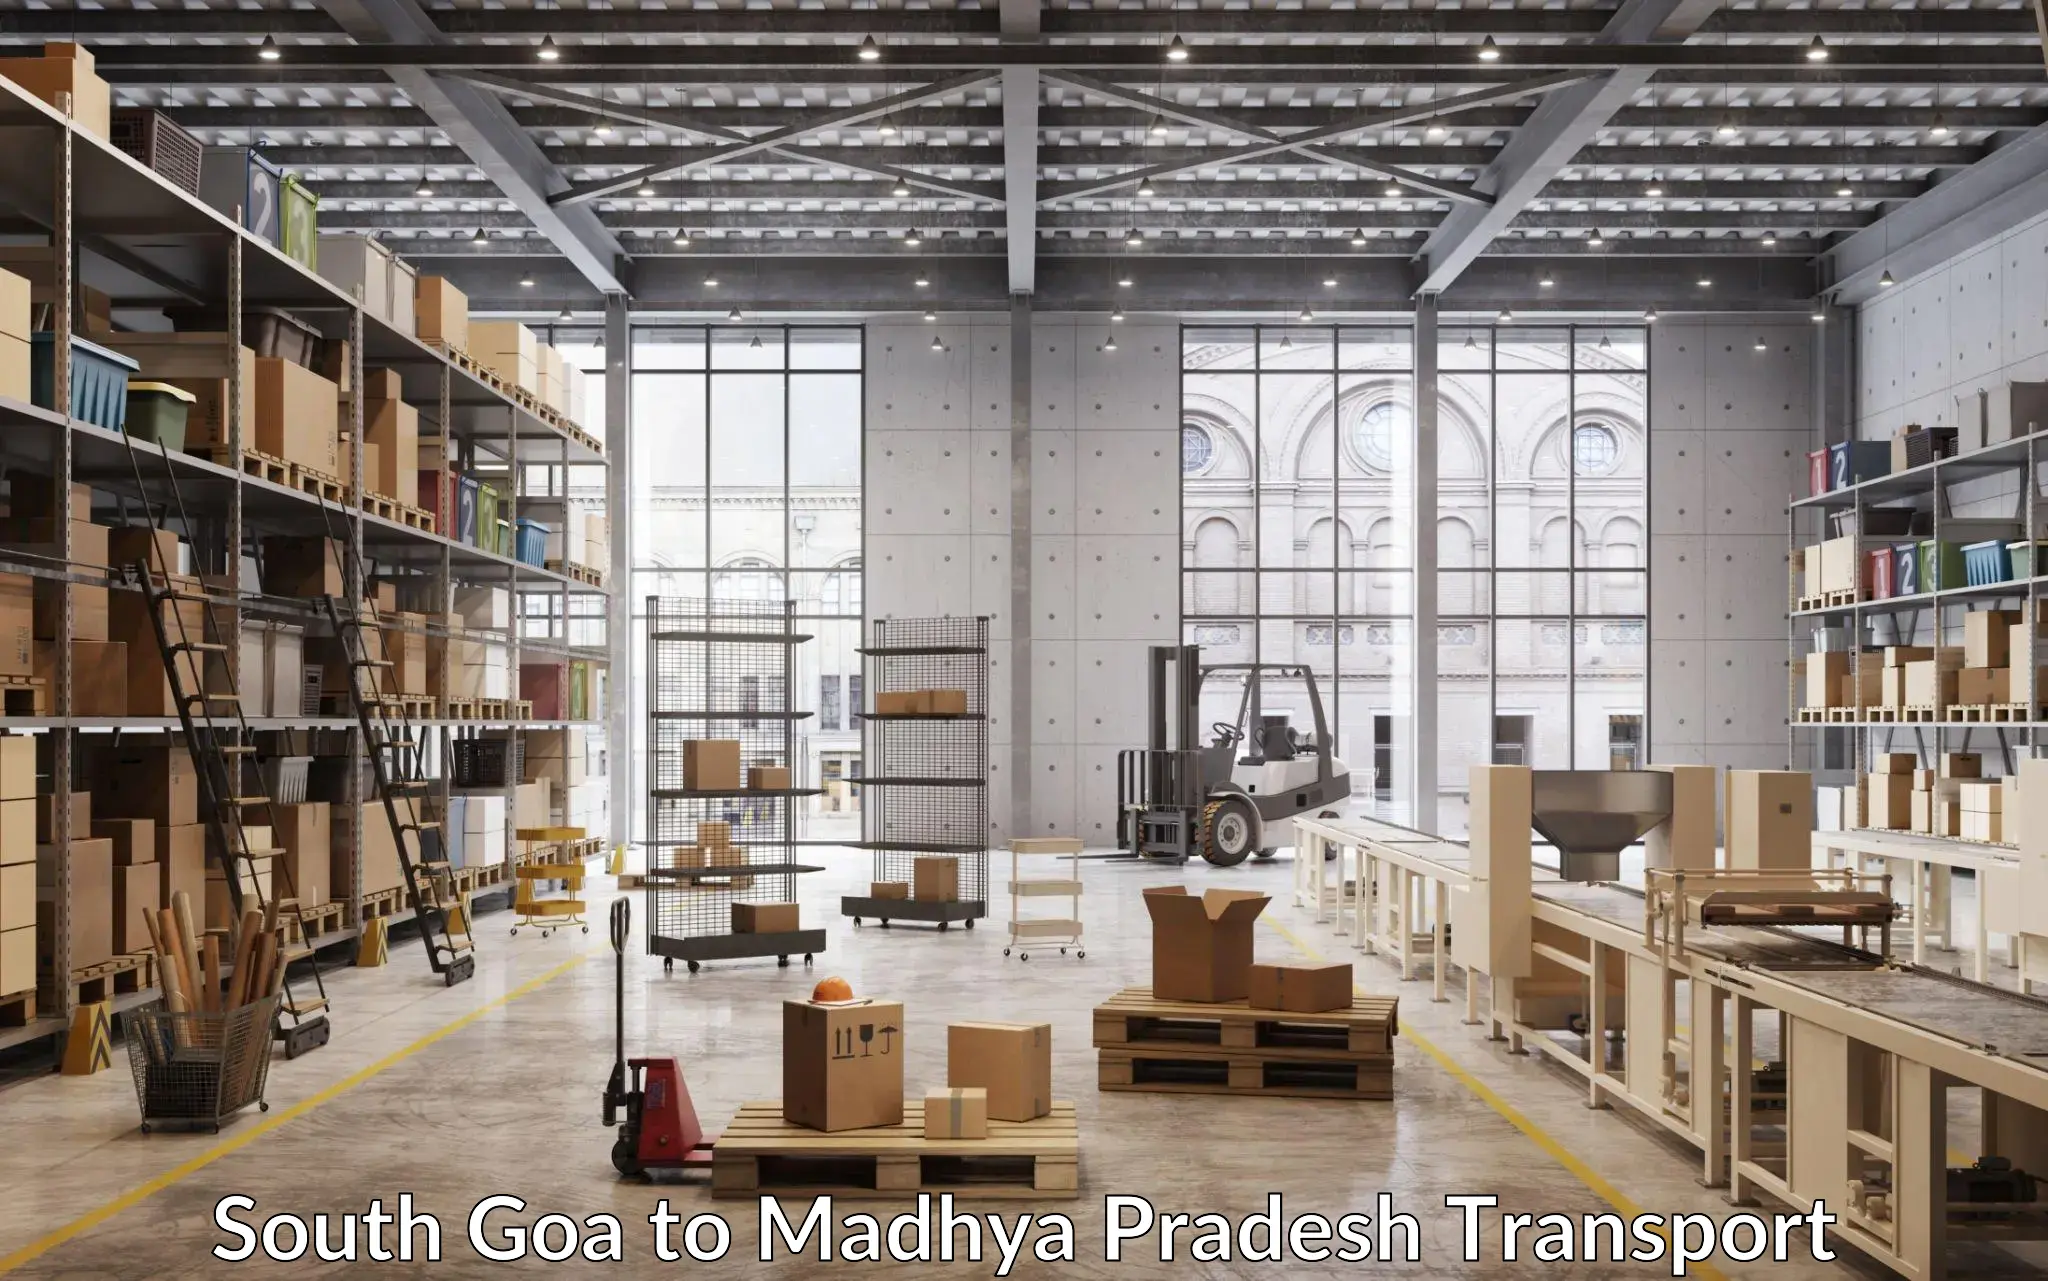 Transport shared services in South Goa to Mandideep